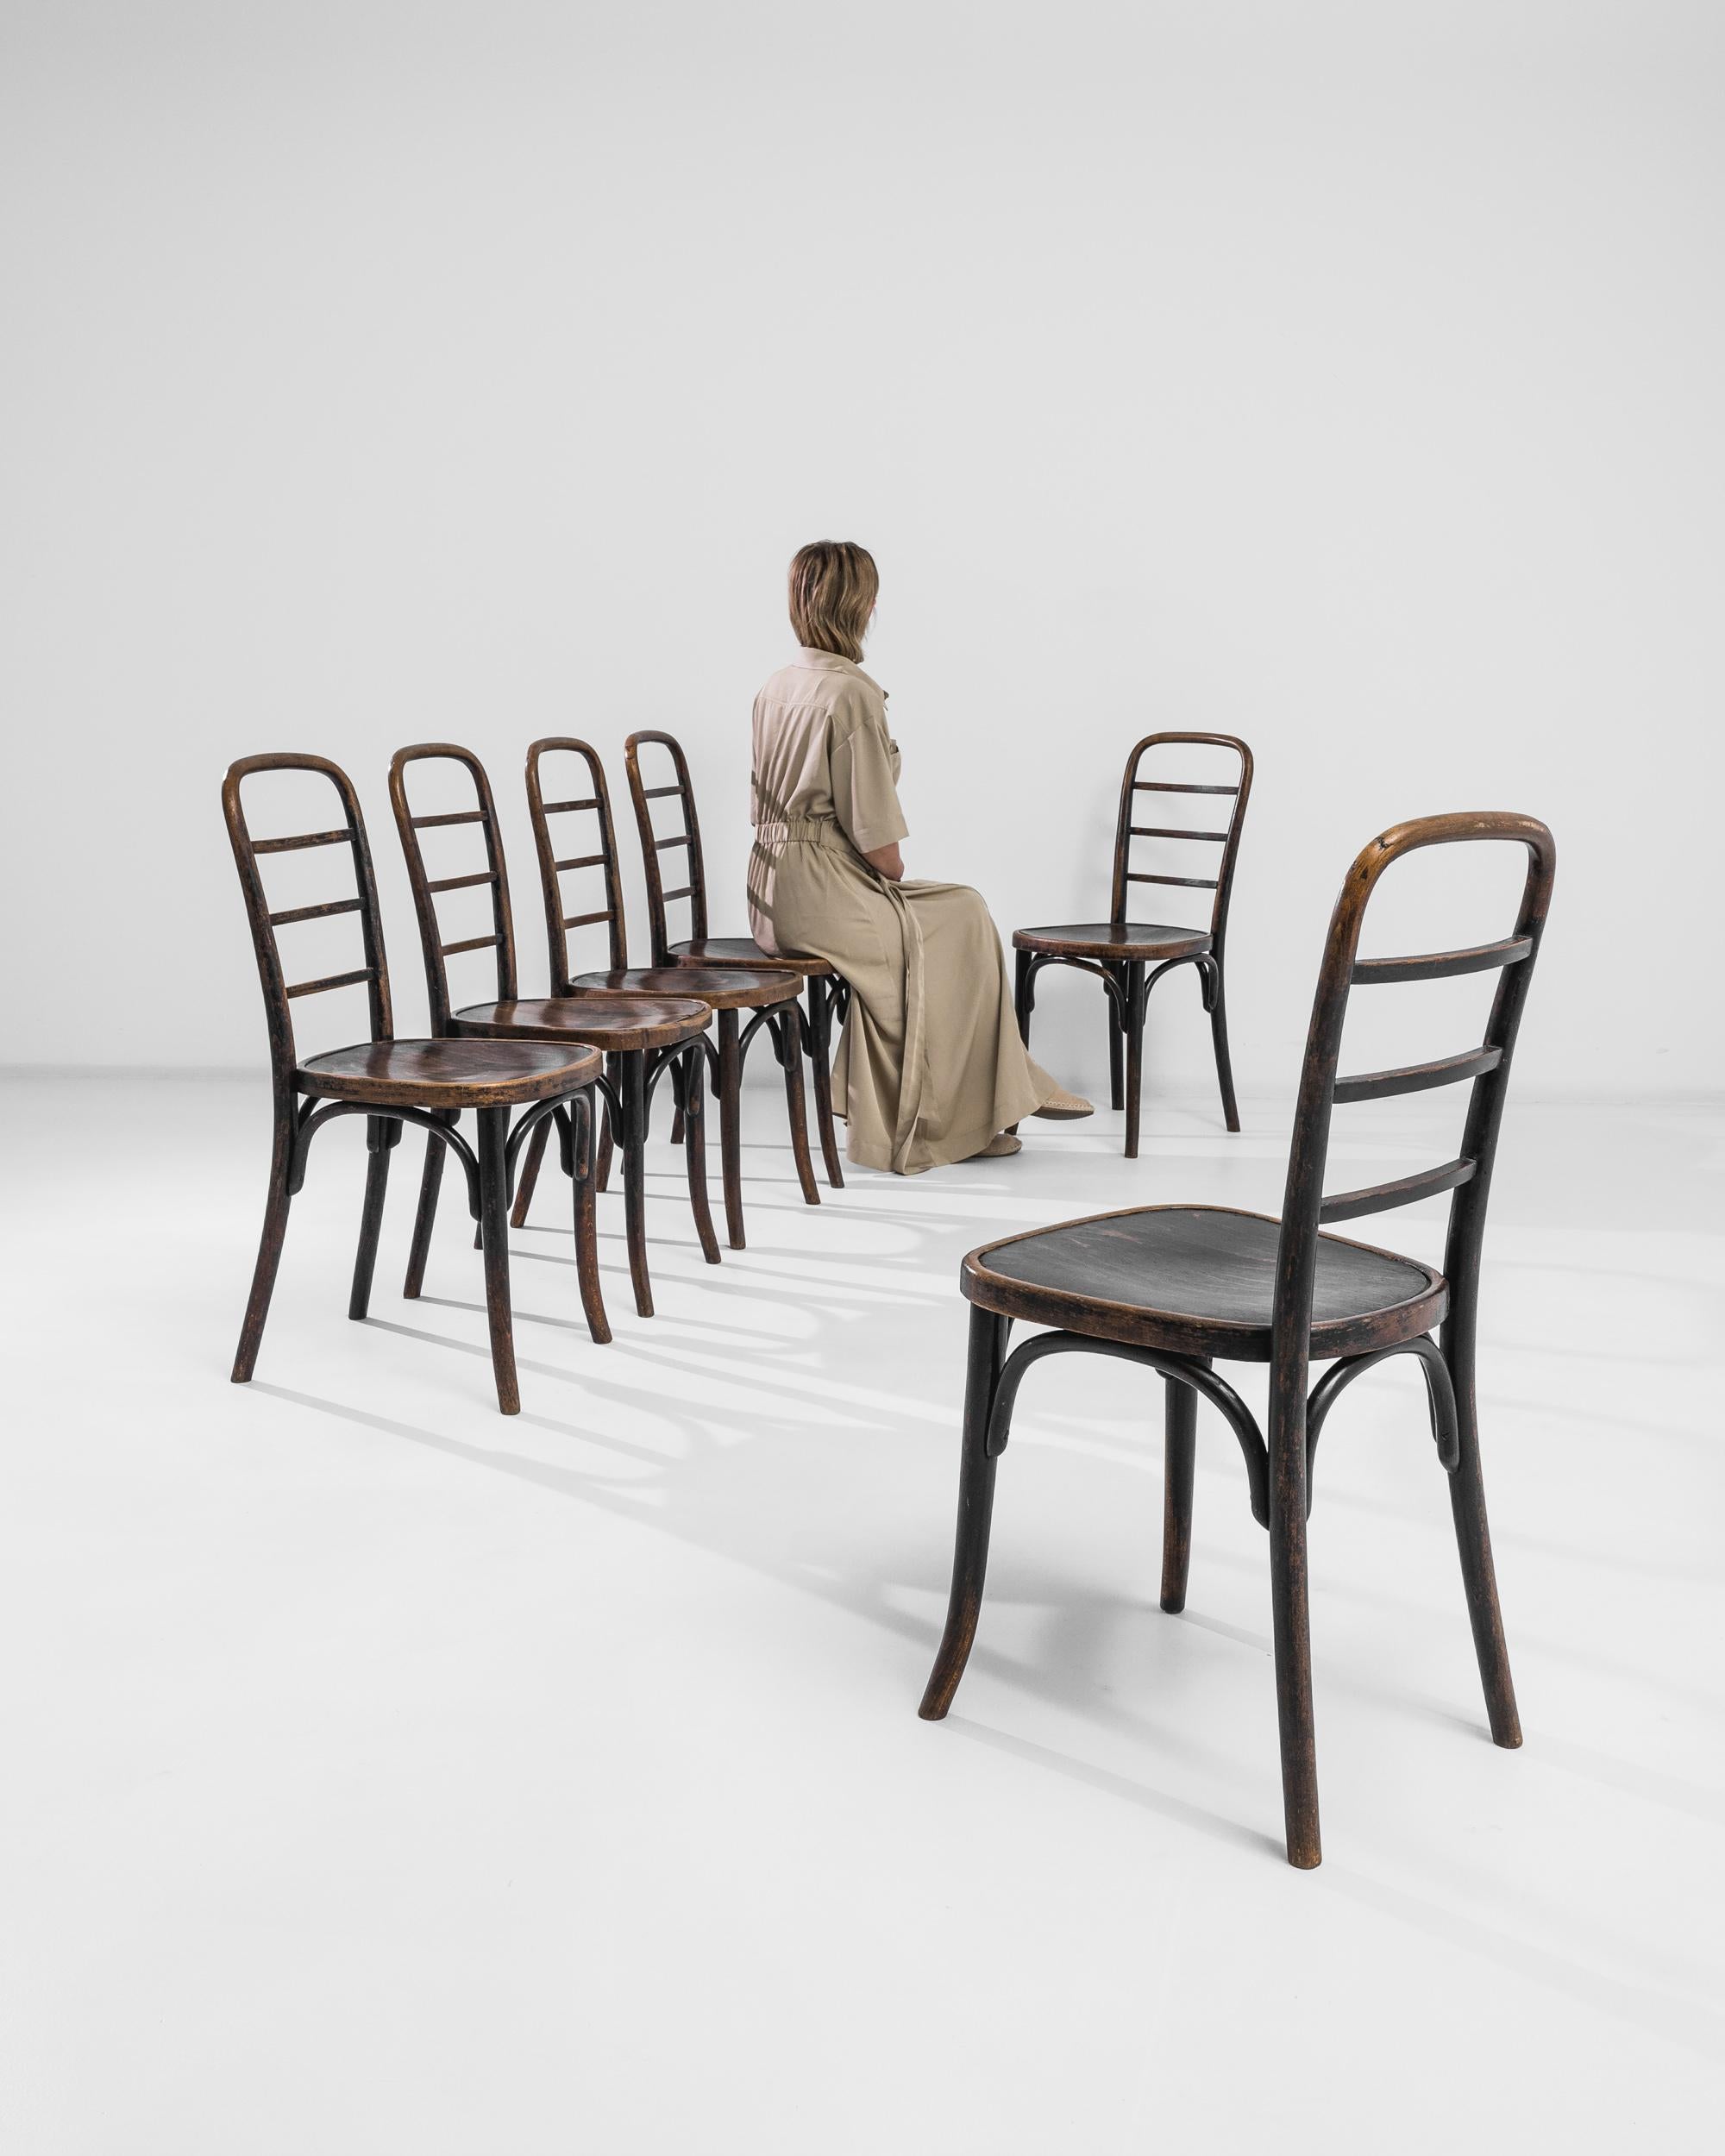 A set of six Thonet dining chairs produced in Austria circa 1930. Standing firmly on their slender wood bent legs, these stylish chairs feature comfortable wide seats and elongated ladder backrests with smoothly rounded tops. The deep tone of the